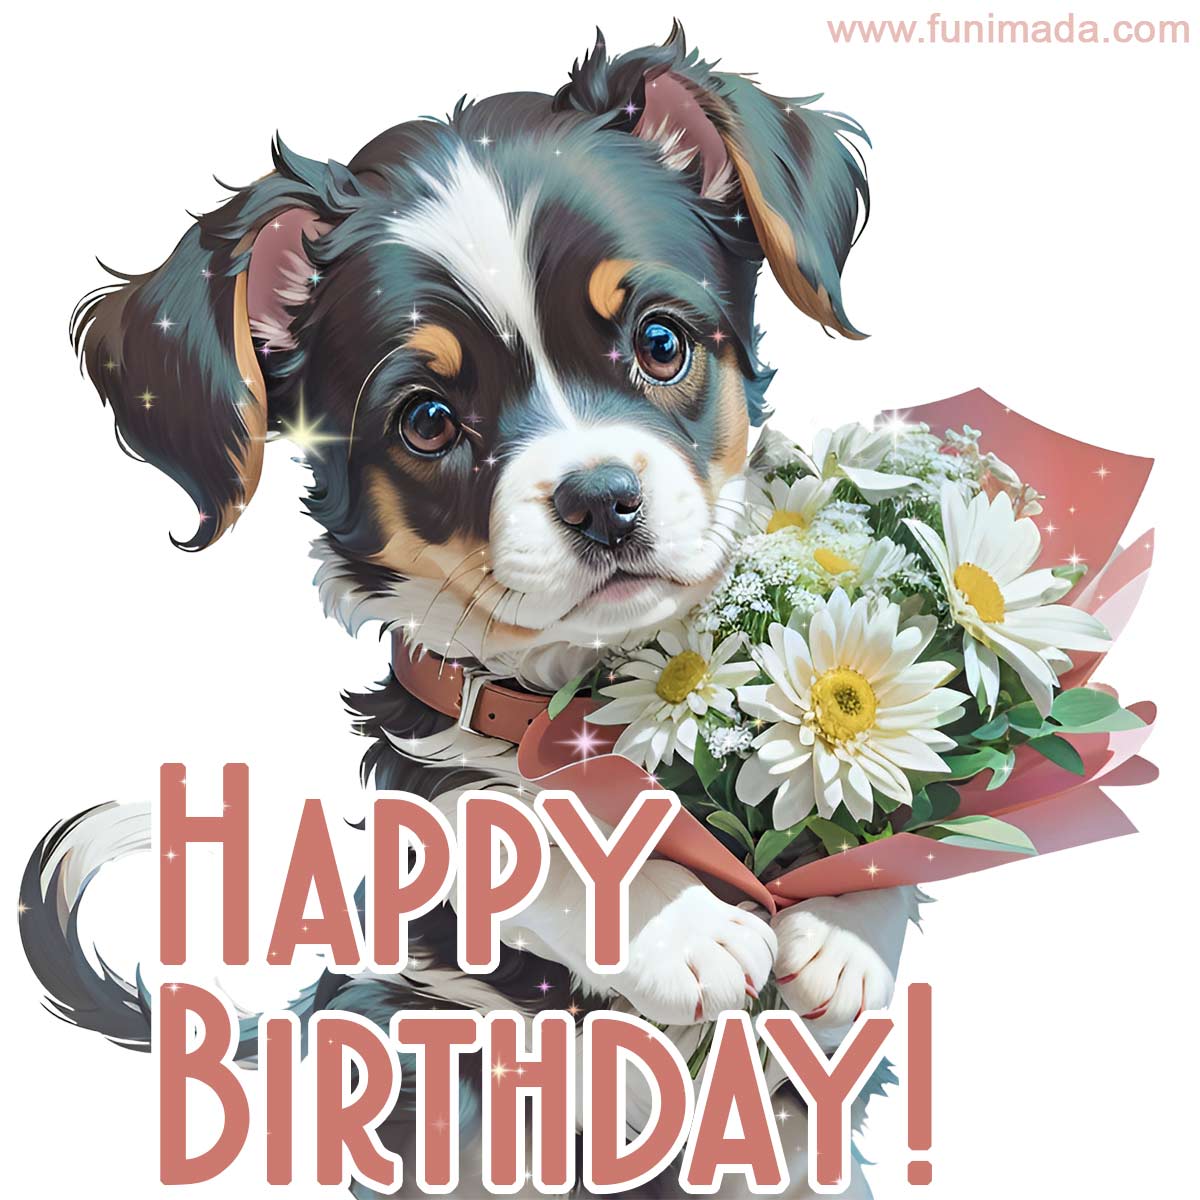 Cute puppy holds a bouquet of daisies in his paws. New original happy birthday image.